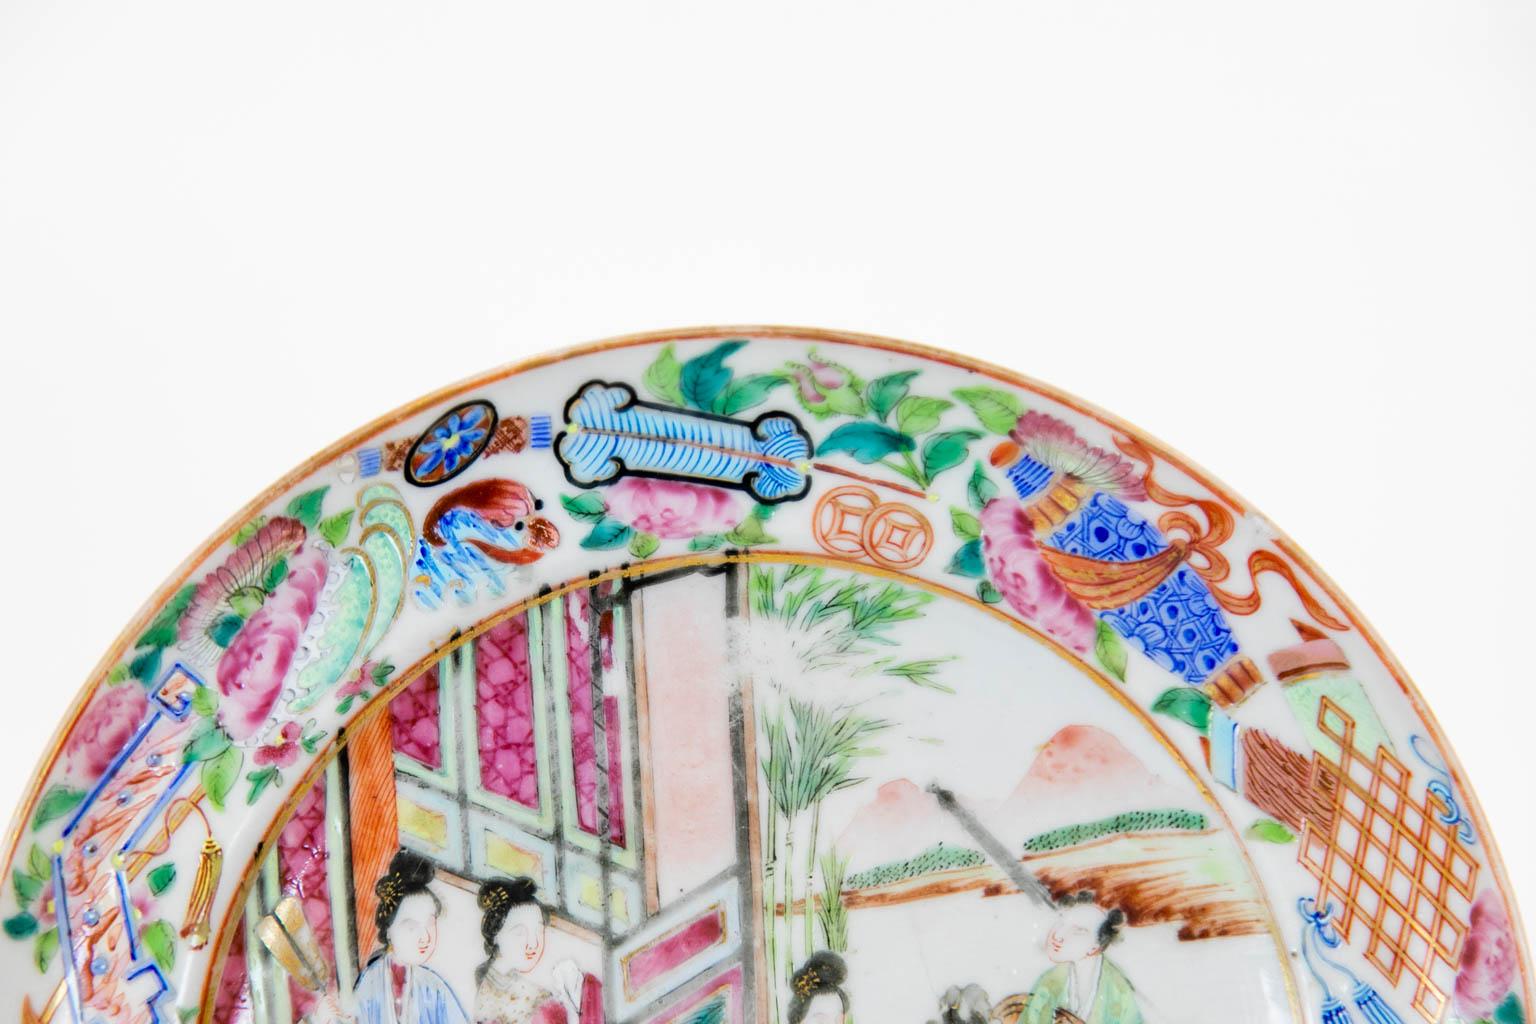 This plate has a center panel with Mandarin court scenes framed by a border with scrolls, interlaced marquis, and marine motifs. It has a very tiny frit chip on the inside rim.